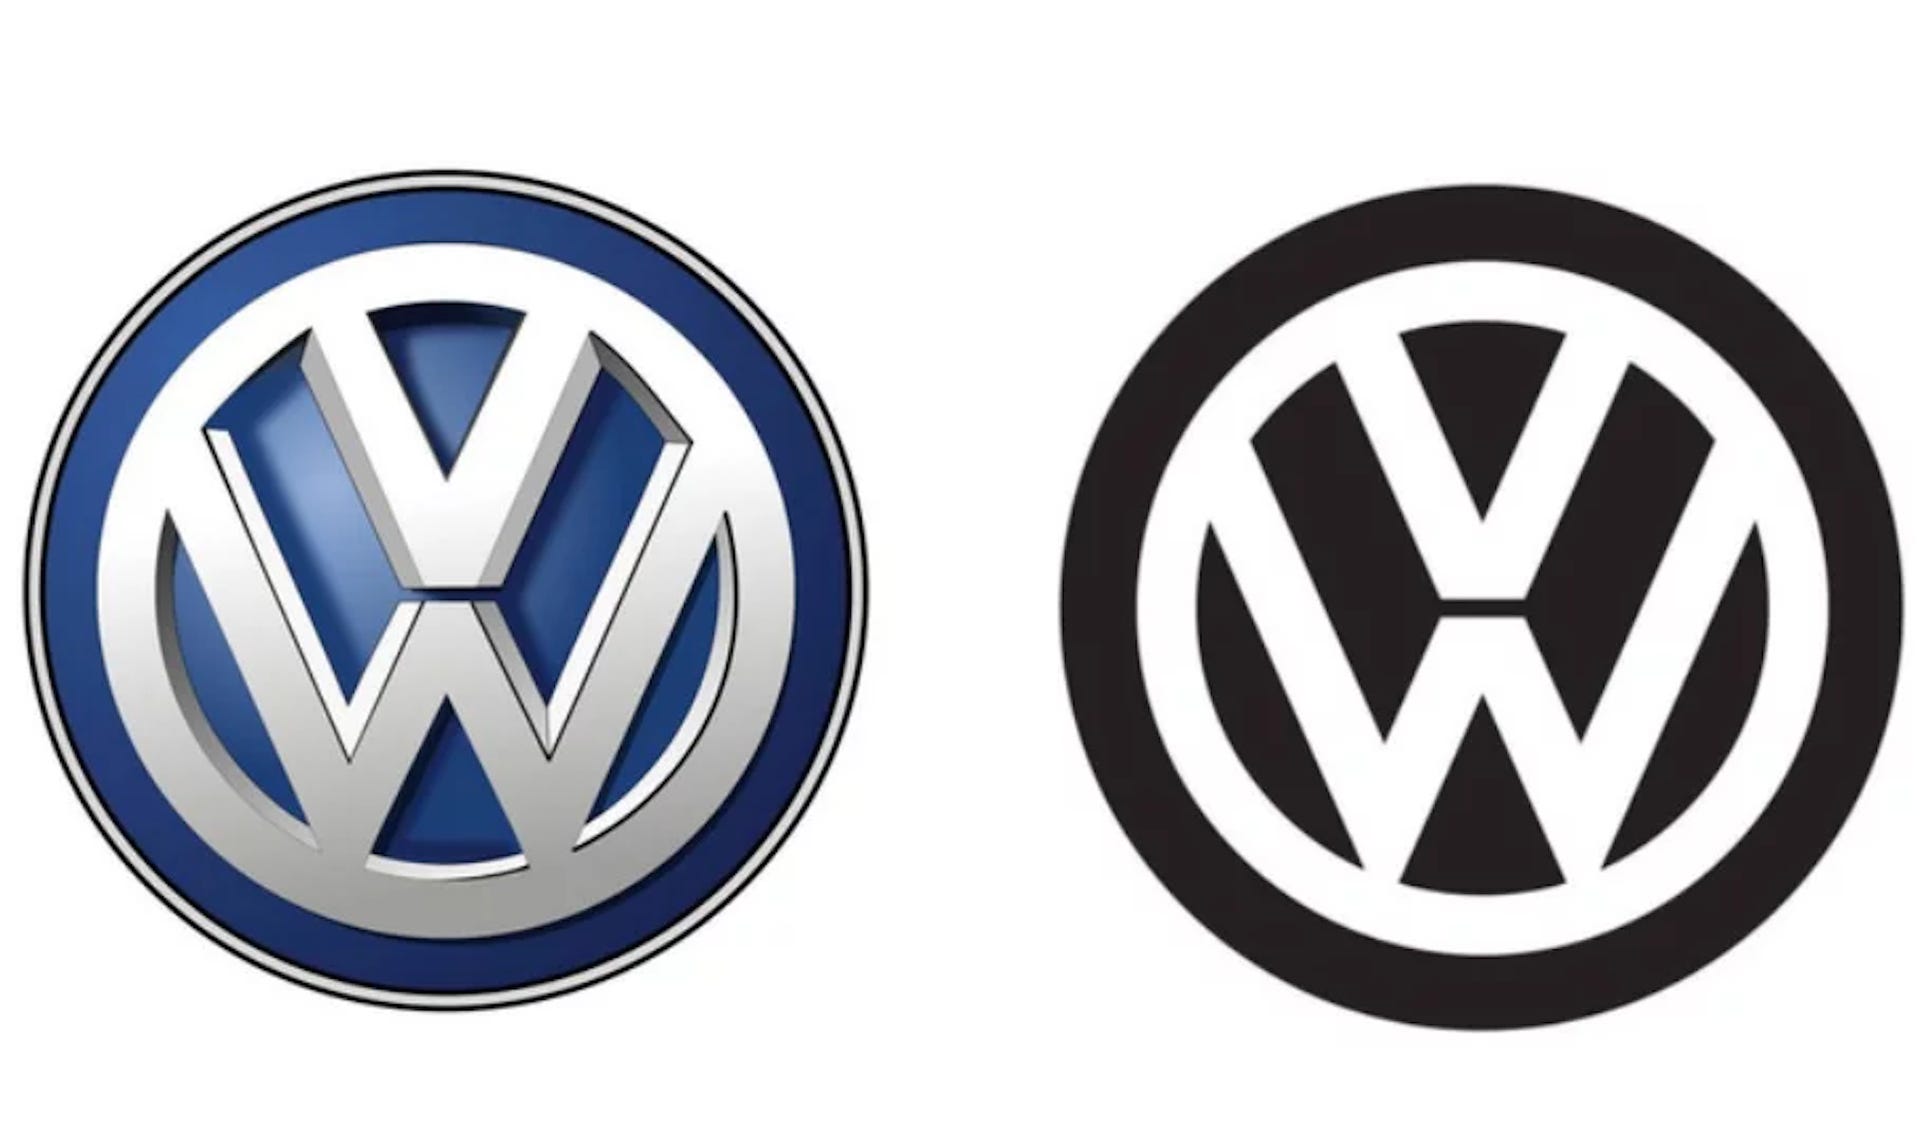 VW is changing its logo for the first time since 2000, but it's not alone -  CNET